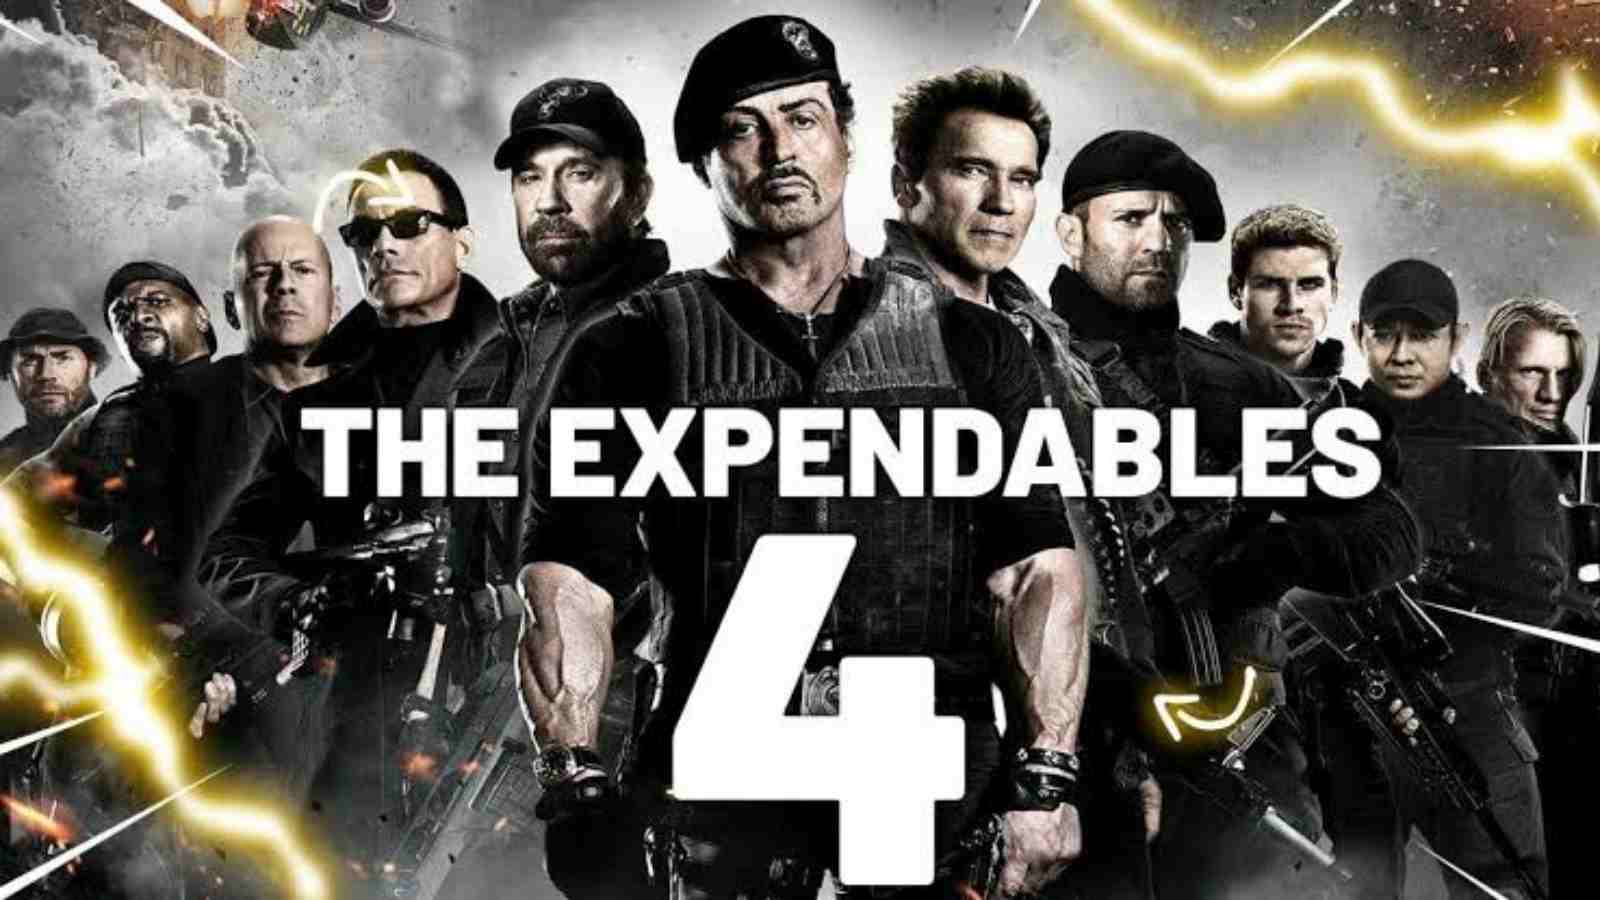 The New Poster Of “Expendables 4” Gets Unvieled At CinemaCon